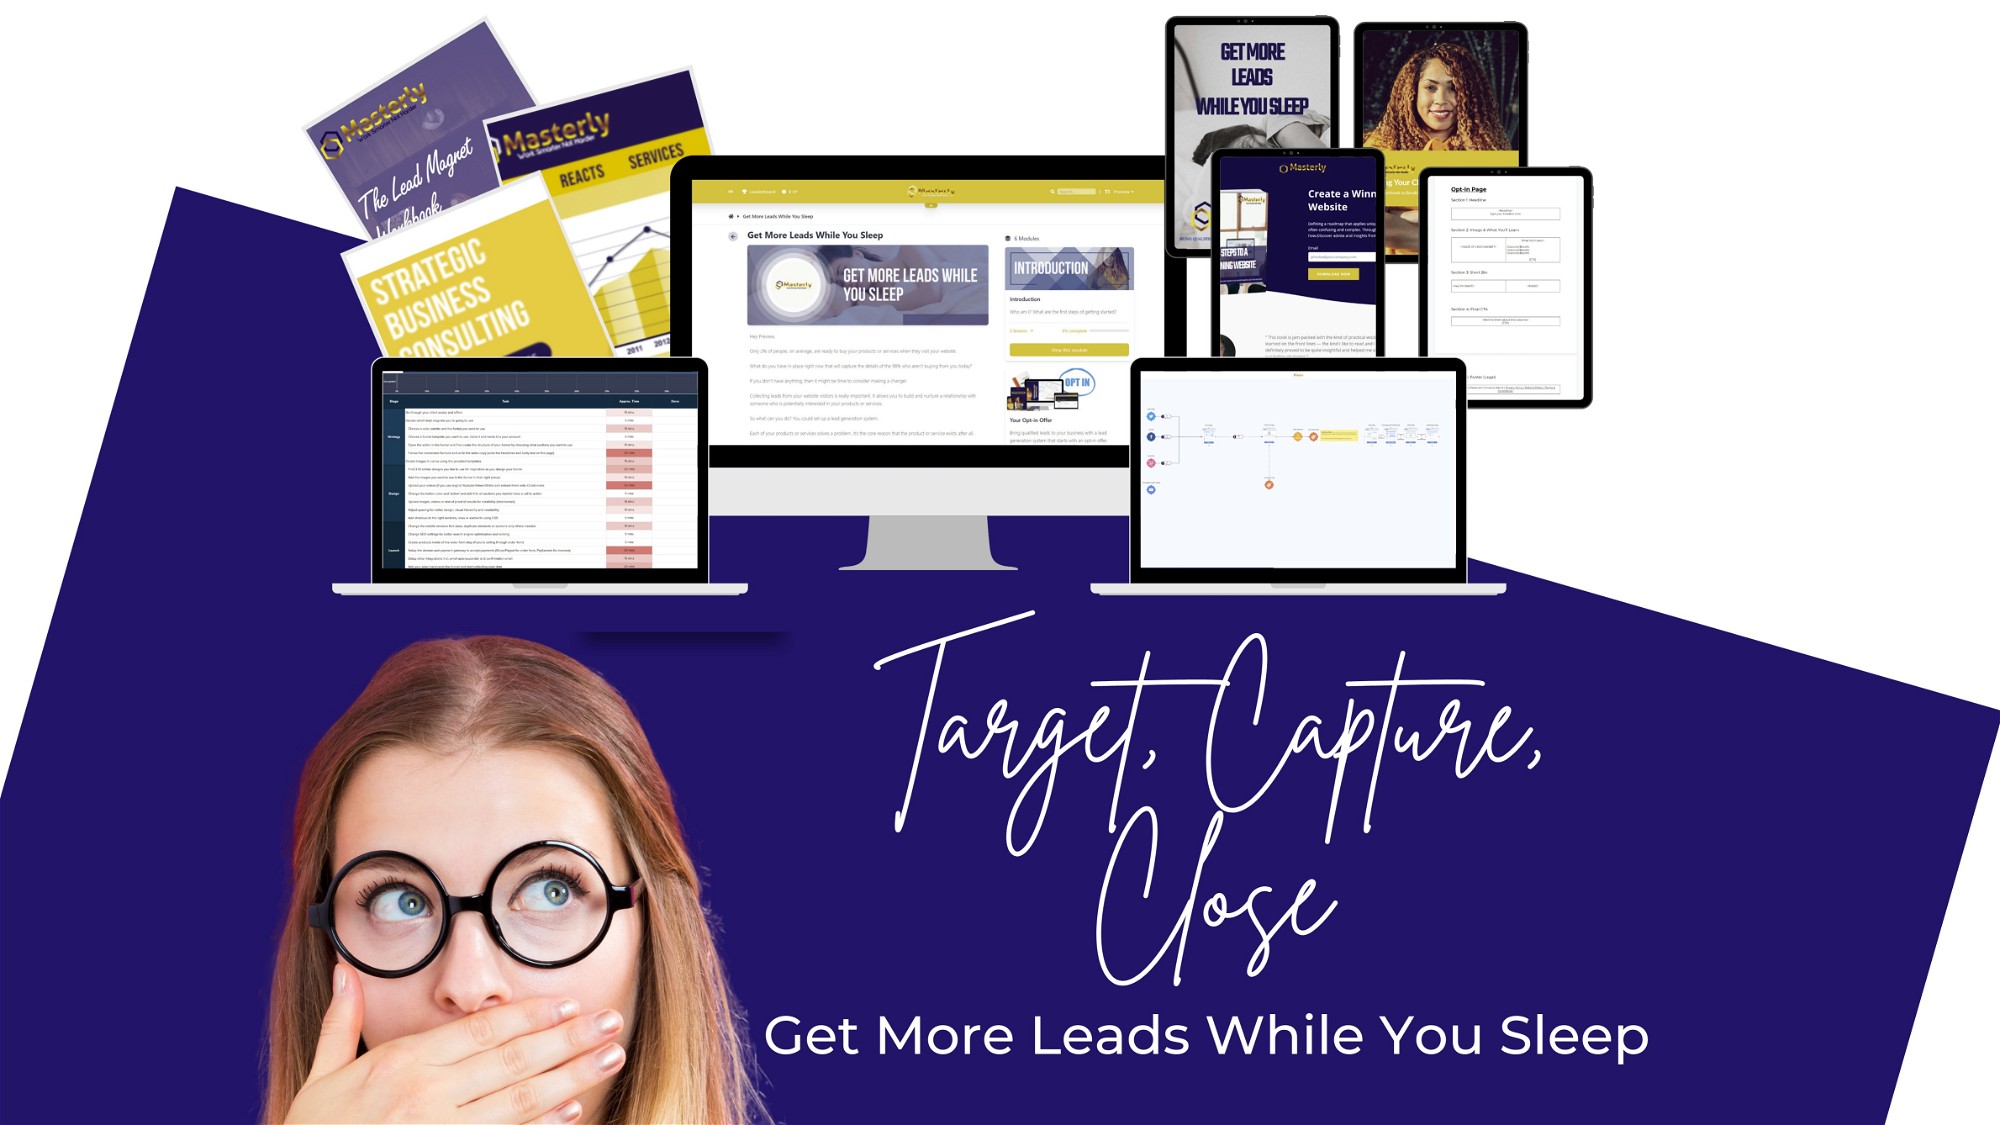 Get More Leads While You Sleep